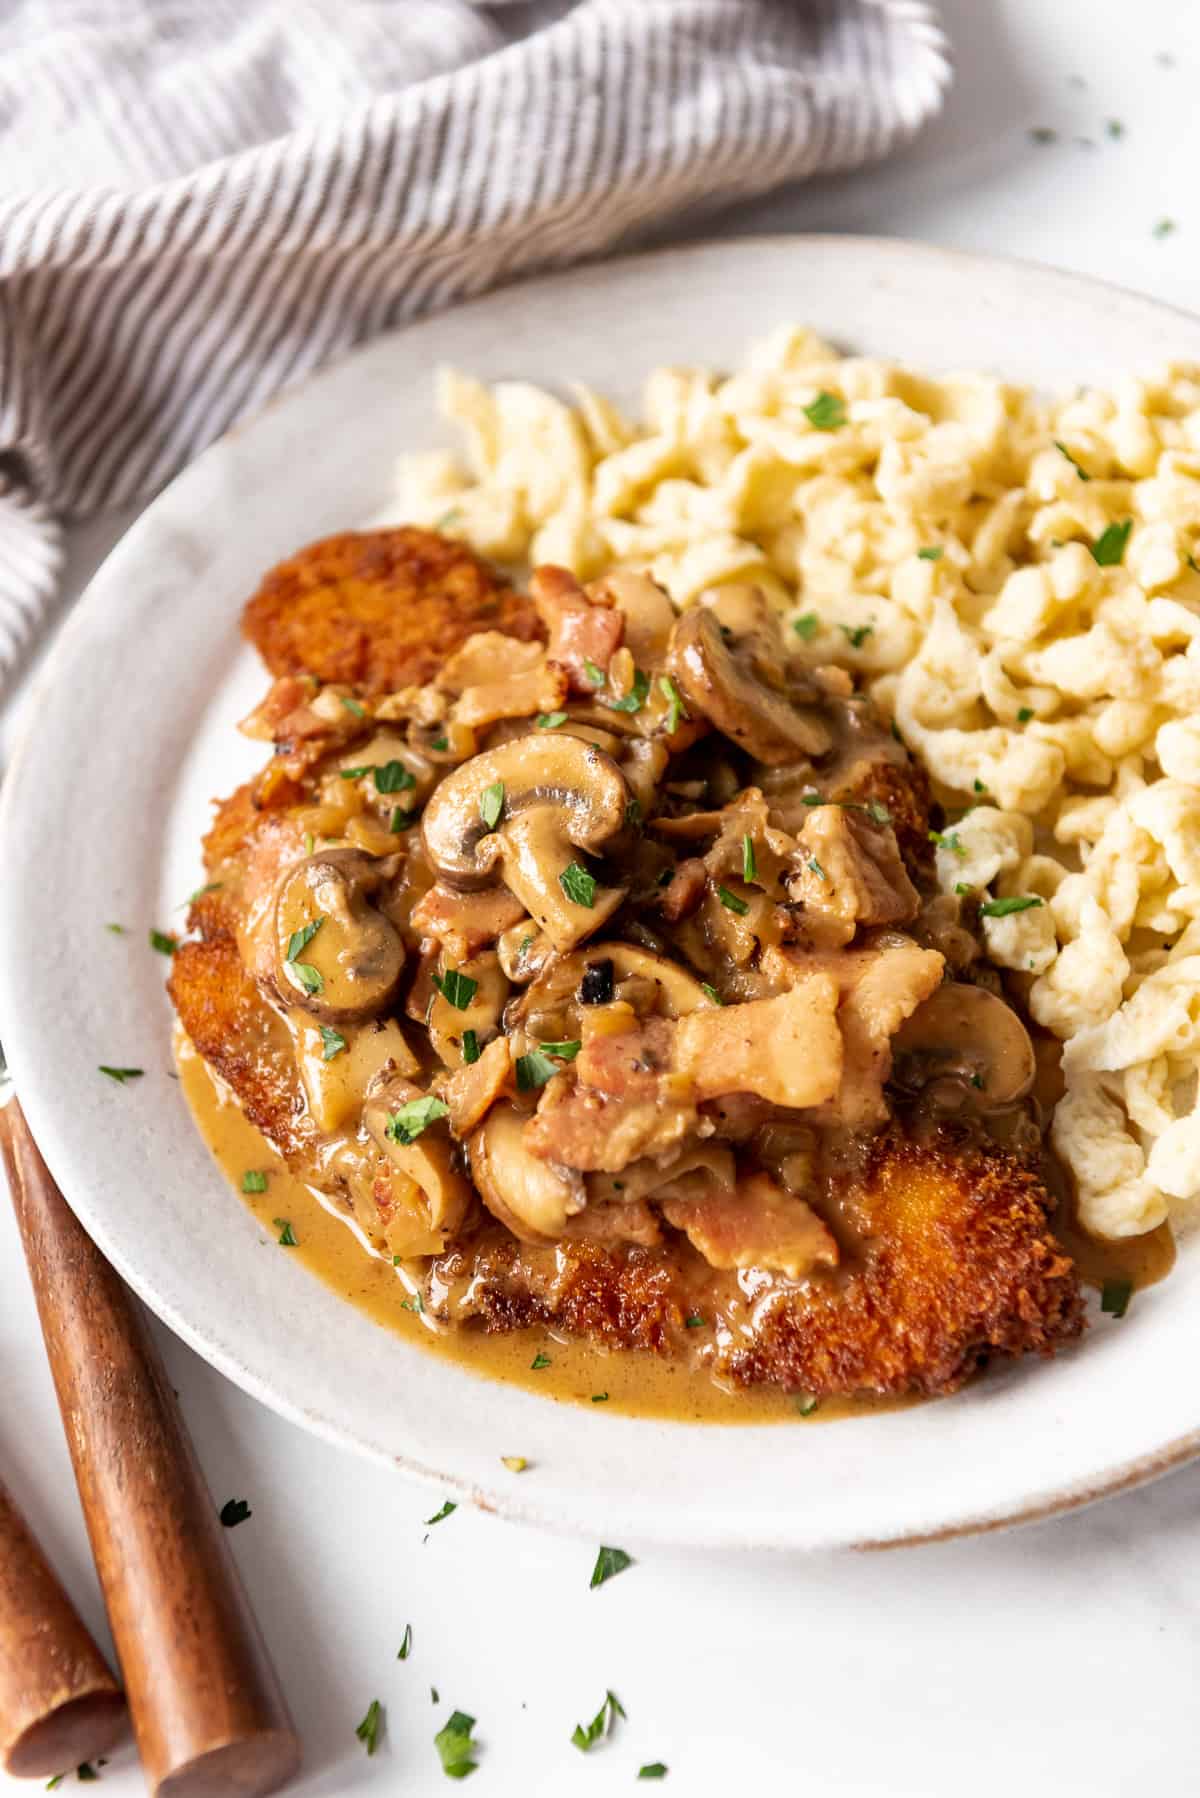 Jagerschnitzel with mushroom sauce and spaetzel on a white plate.